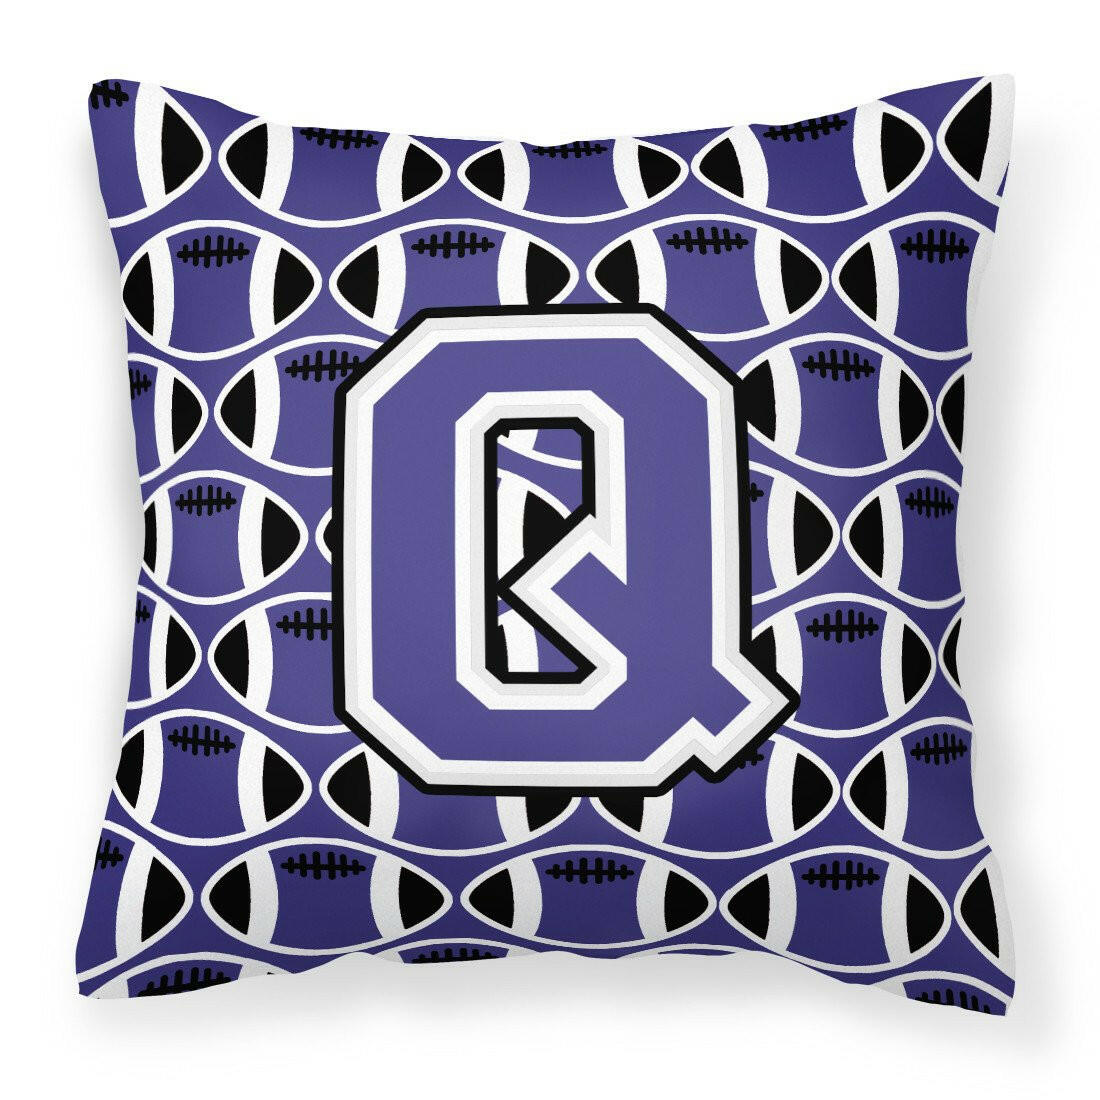 Letter Q Football Purple and White Fabric Decorative Pillow CJ1068-QPW1414 by Caroline's Treasures